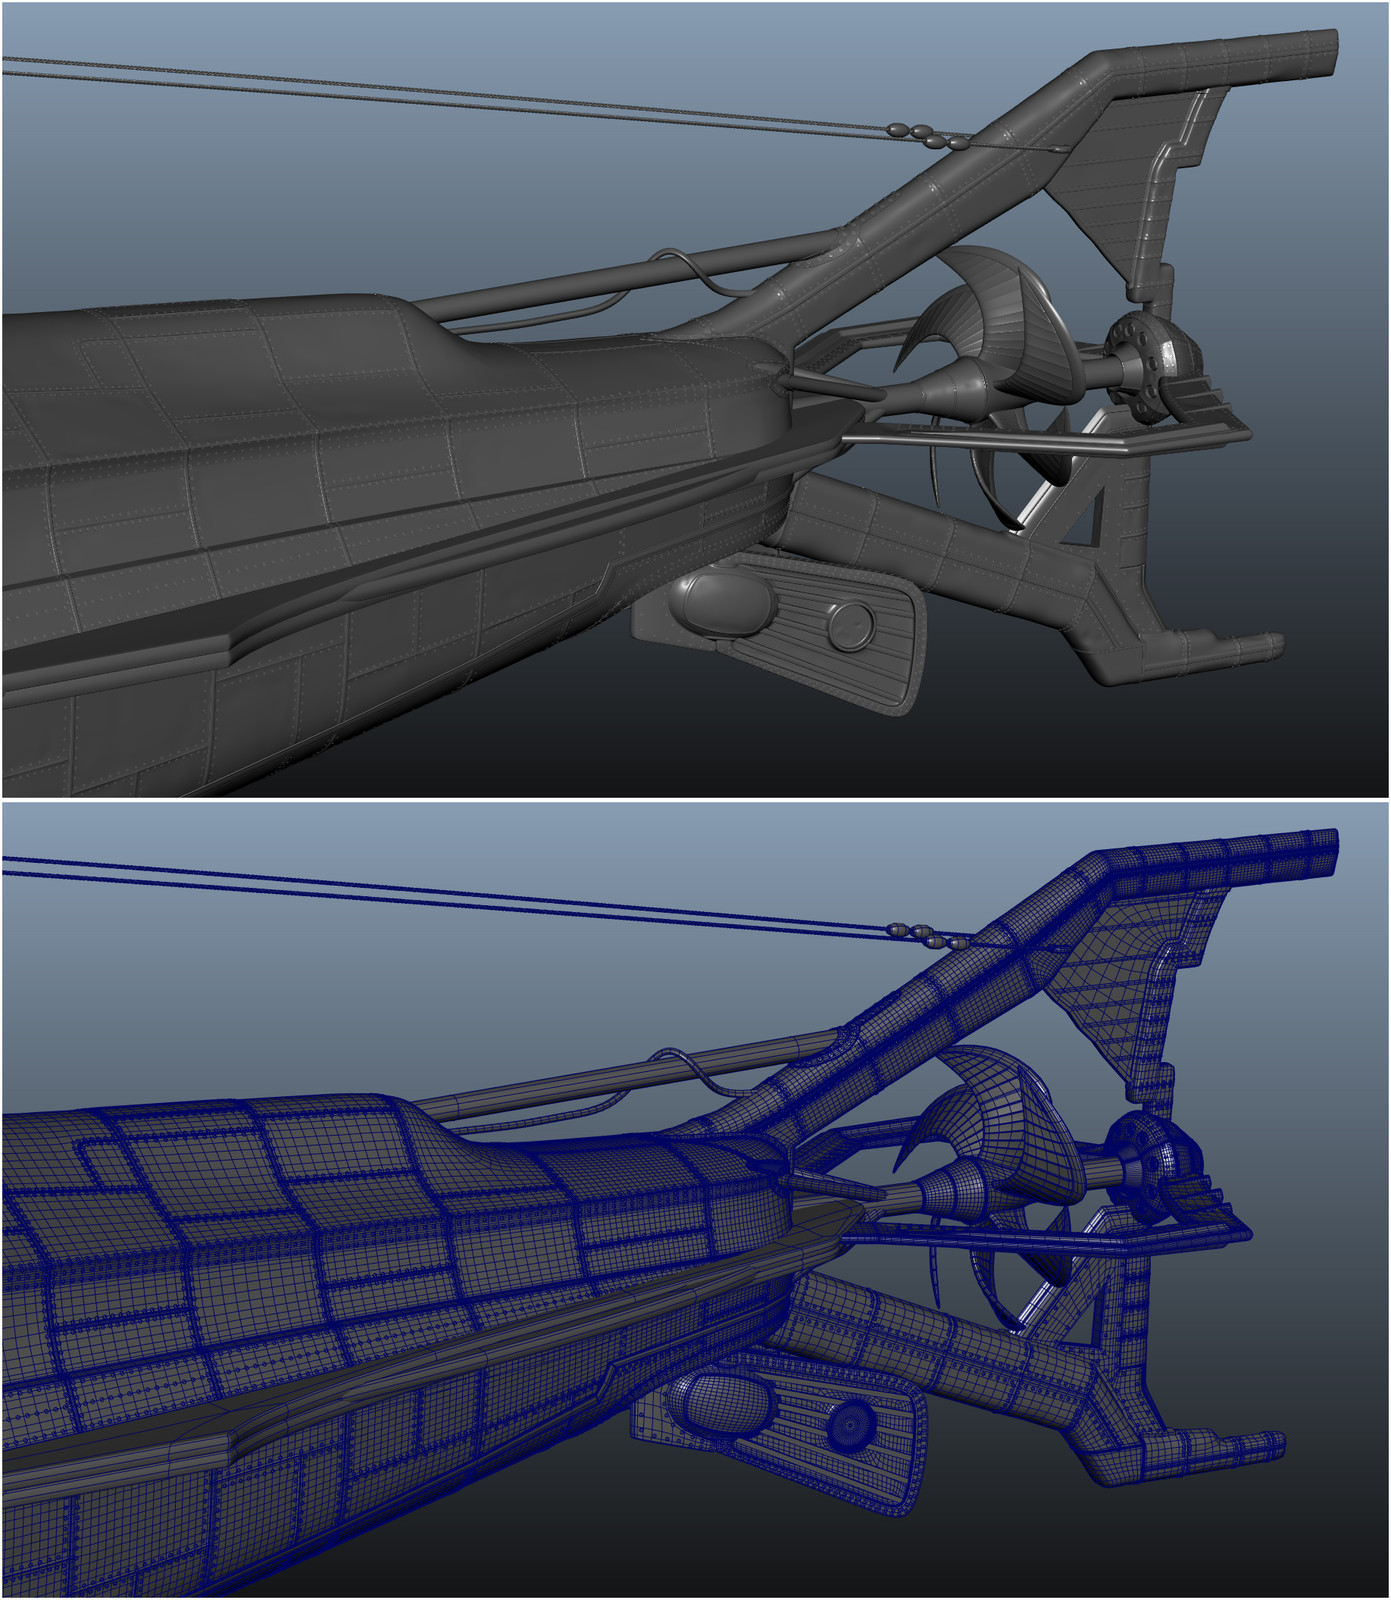 maya screen grab of the Sub I modeled. It was modeled old school all in maya no displacements. resolution was needed to sculpt the panels. There are 60000+ rivets. Model is also water tight for water sims.